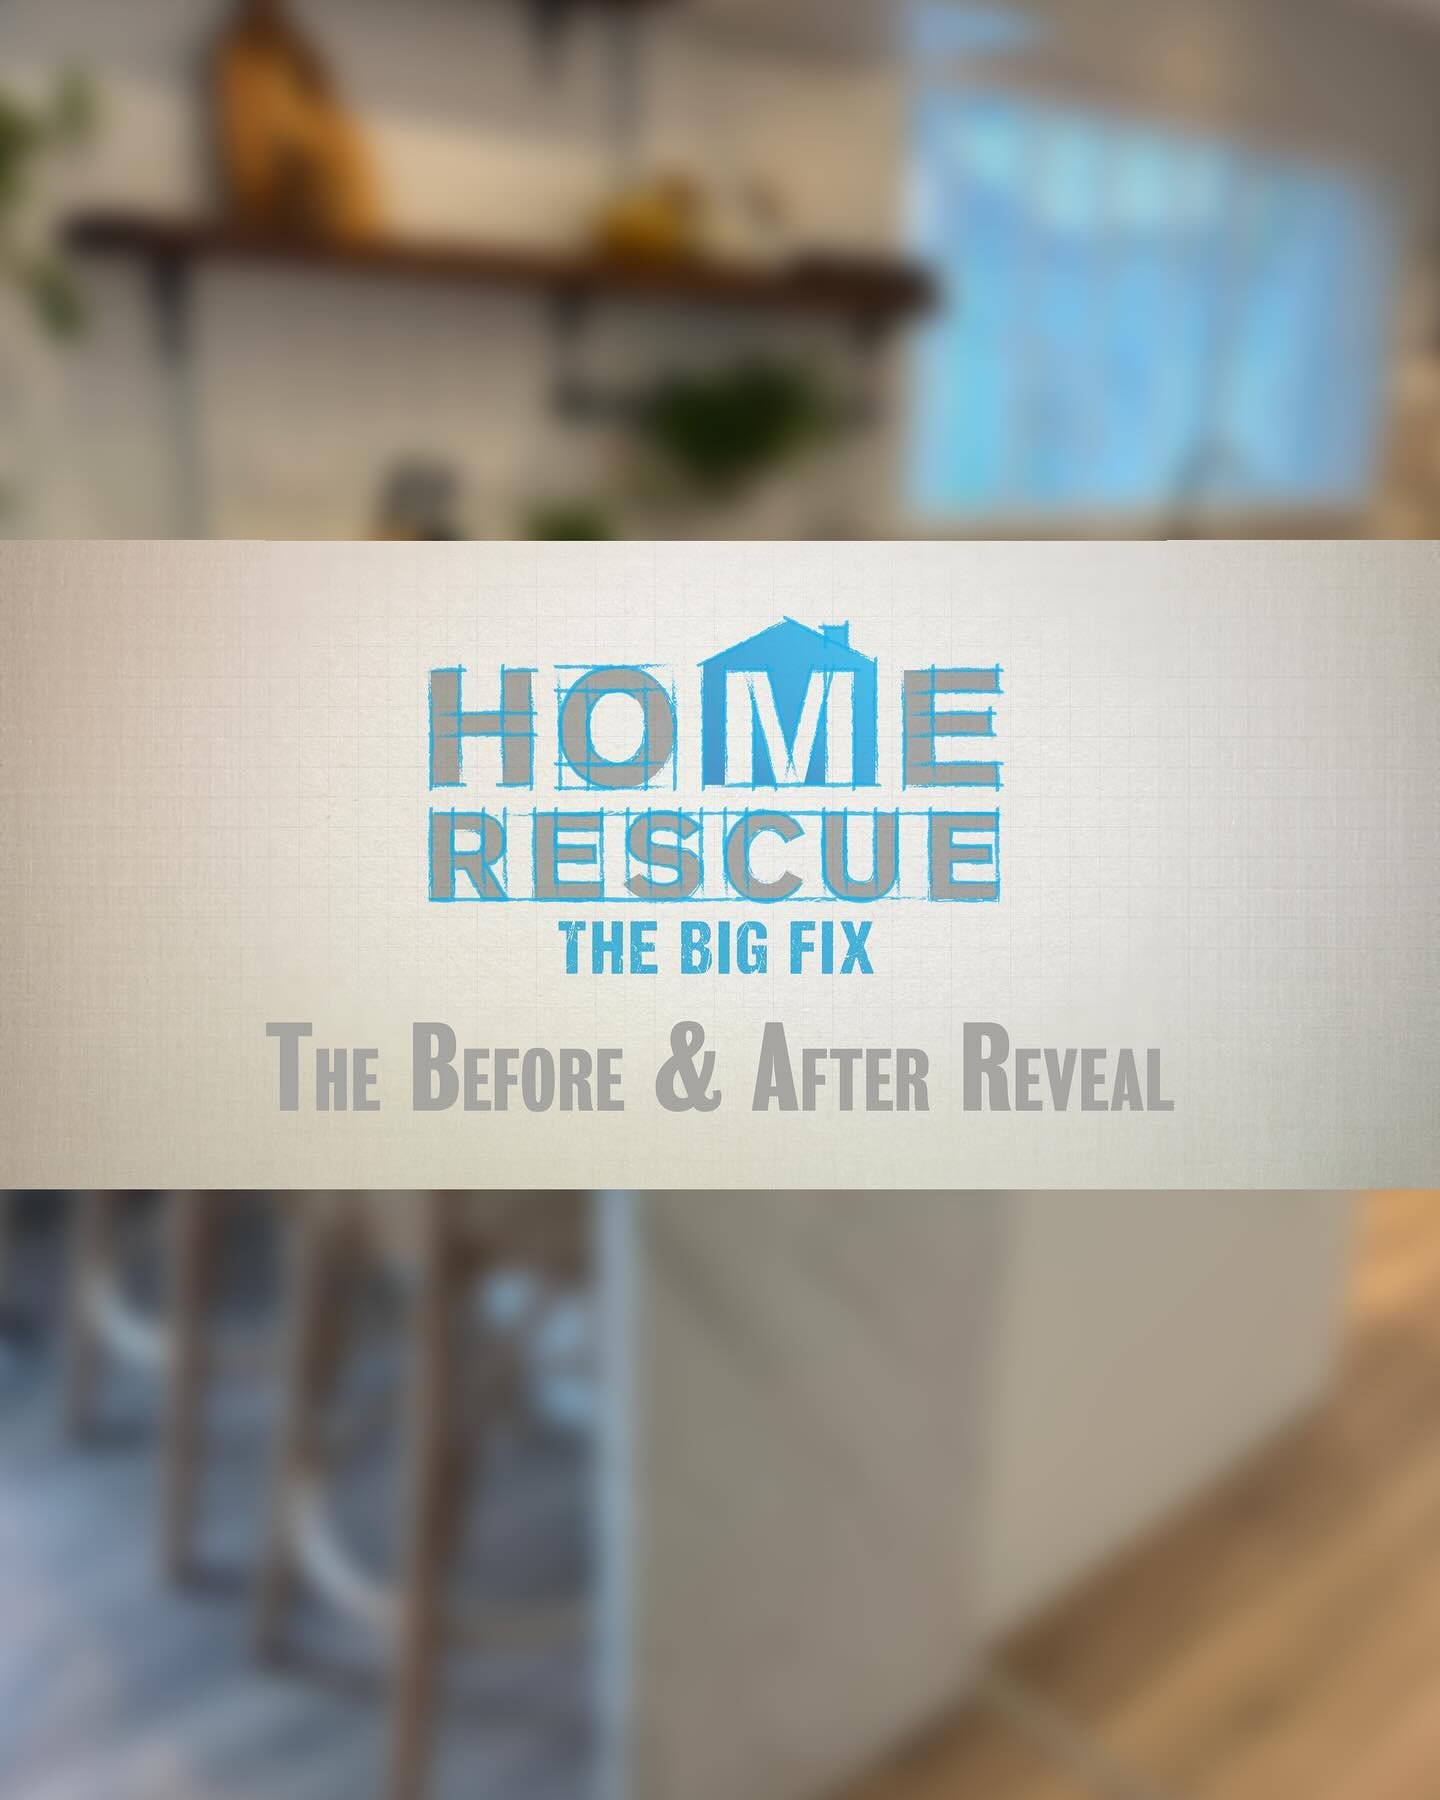 Kicking off #HomeRescue: The Big Fix in style with this transformation ✨ Swipe to see more! | @rteplayer